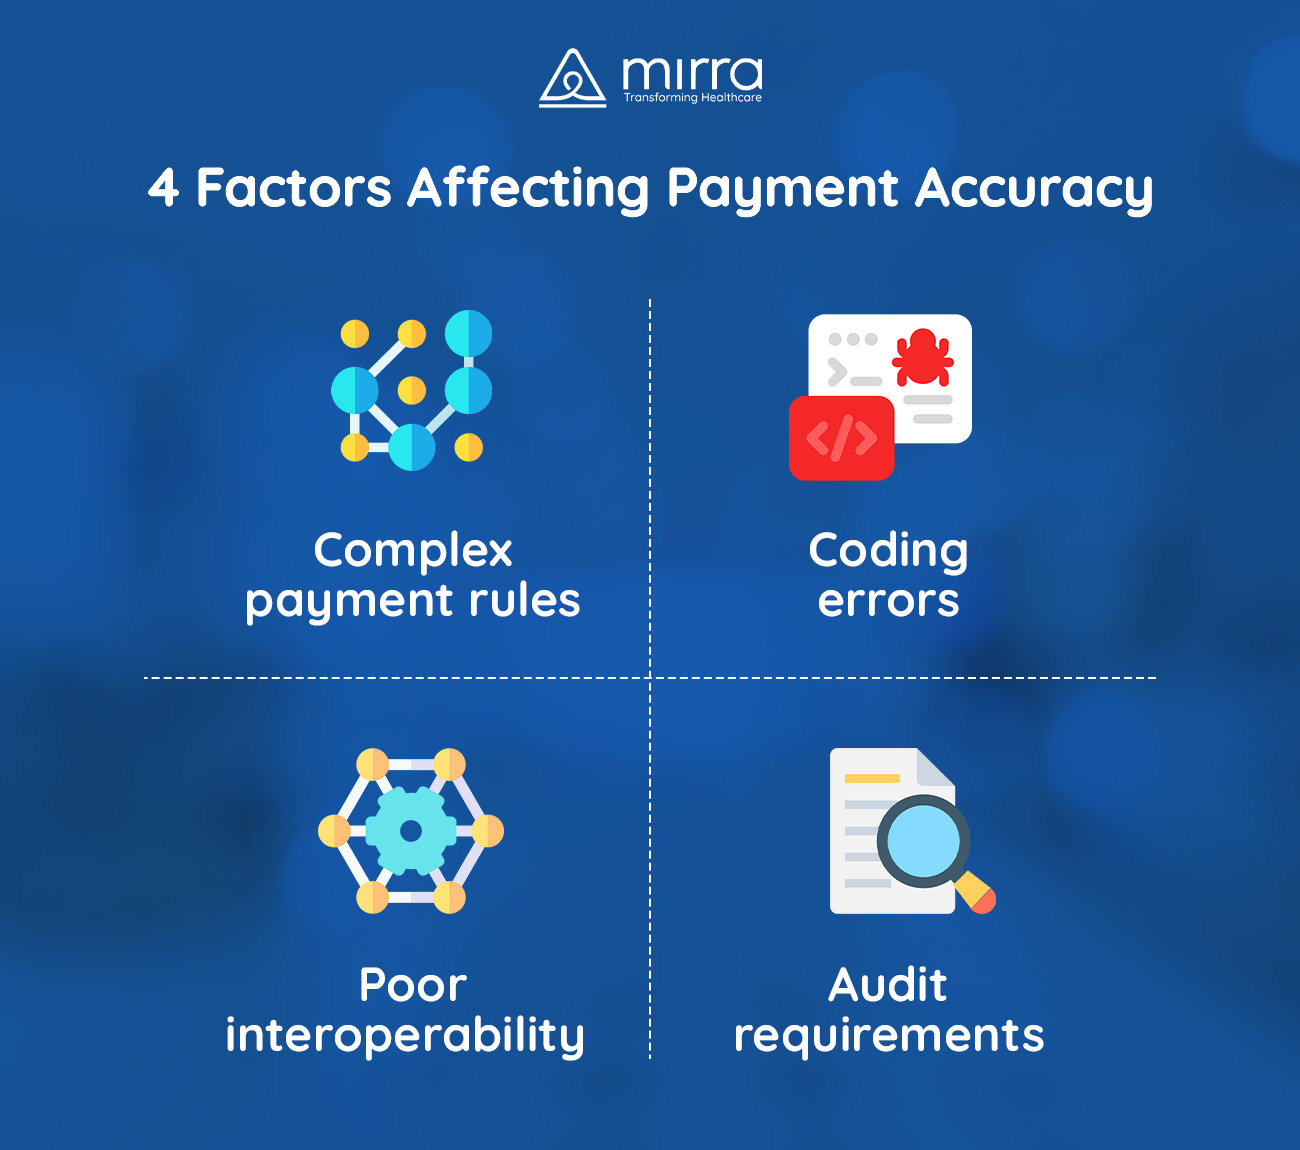 4 Factors Affecting Payment Accuracy